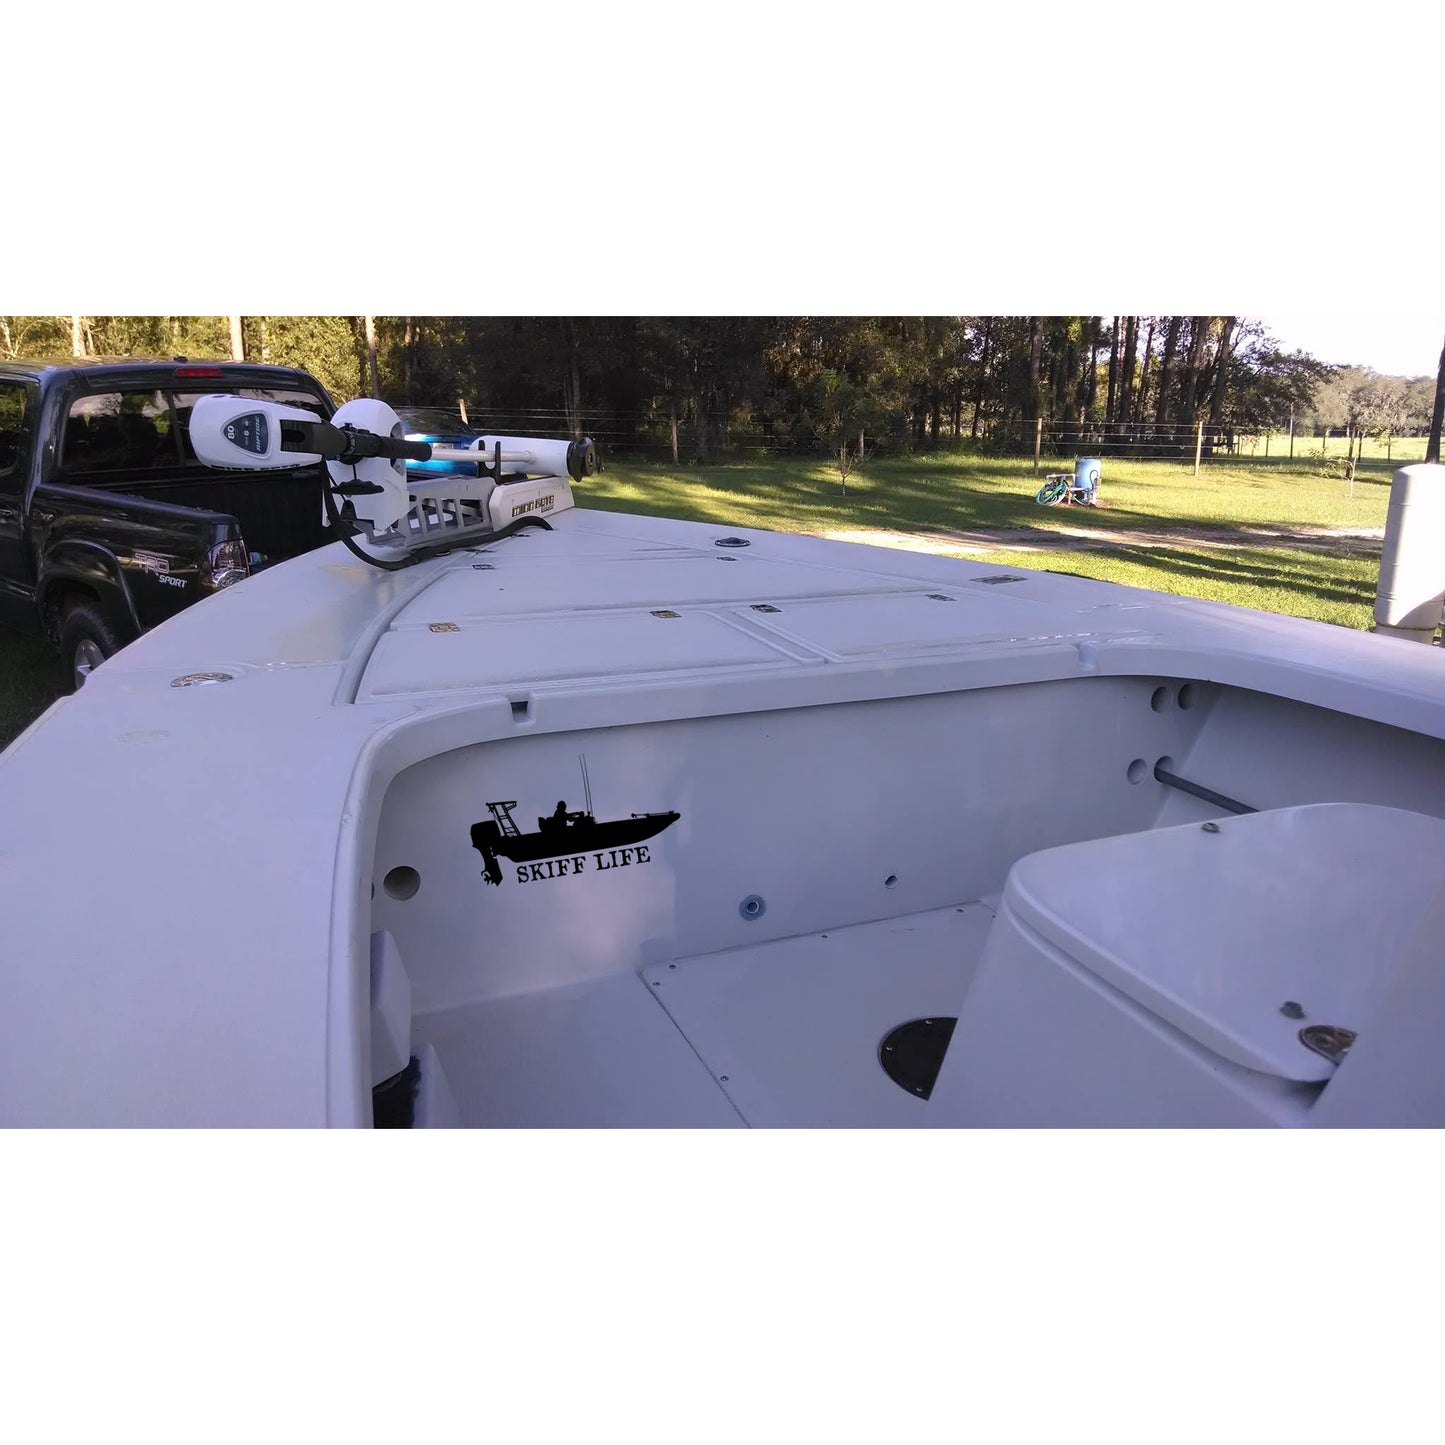 Flats In Shore Fishing Decal Stickers by Skiff Life - Skiff Life